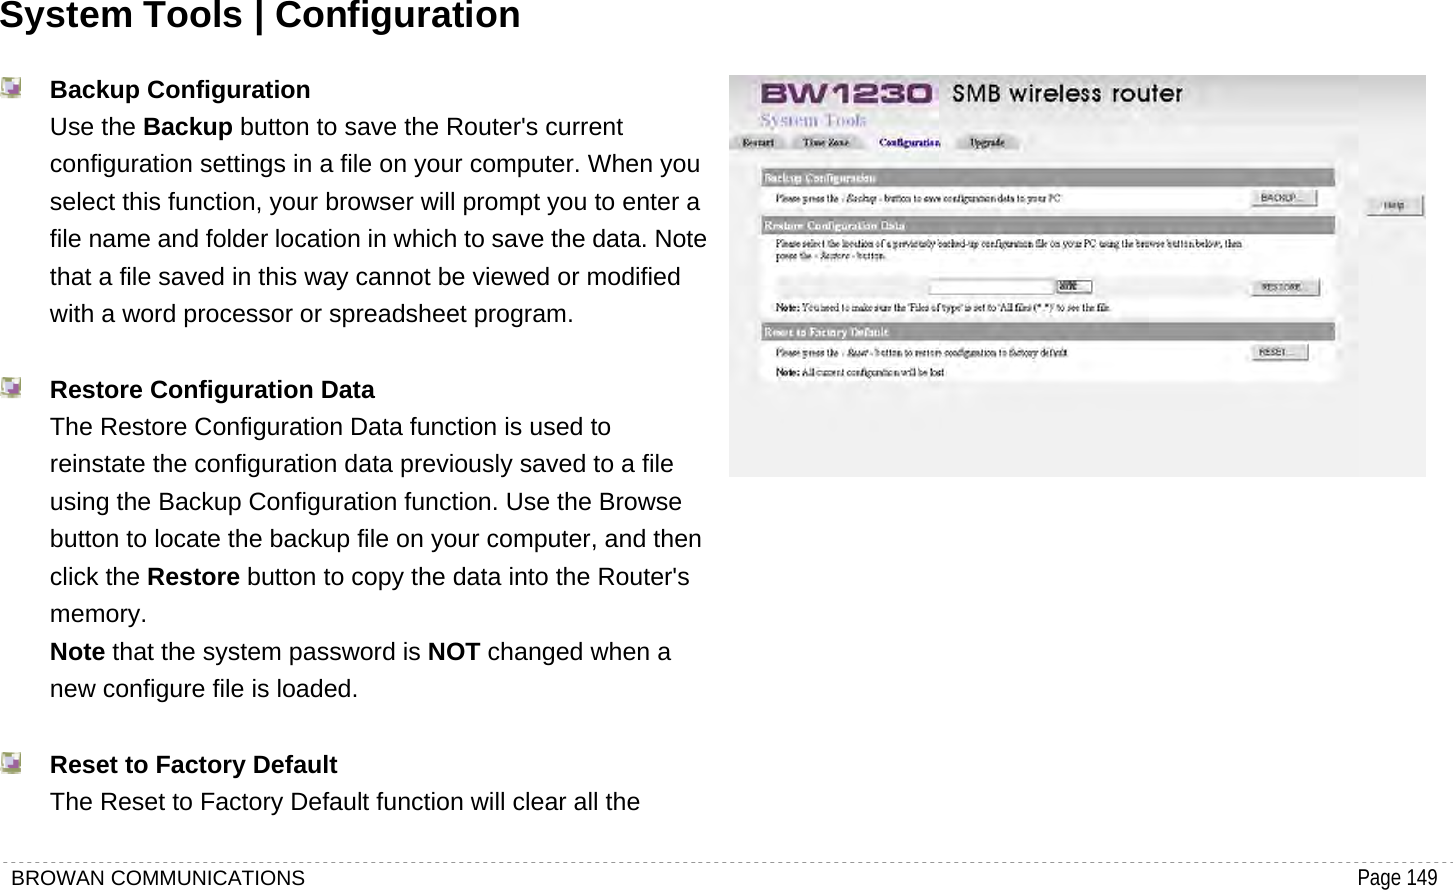 BROWAN COMMUNICATIONS                                                                                           Page 149  System Tools | Configuration  Backup Configuration Use the Backup button to save the Router&apos;s current configuration settings in a file on your computer. When you select this function, your browser will prompt you to enter a file name and folder location in which to save the data. Note that a file saved in this way cannot be viewed or modified with a word processor or spreadsheet program.     Restore Configuration Data The Restore Configuration Data function is used to reinstate the configuration data previously saved to a file using the Backup Configuration function. Use the Browse button to locate the backup file on your computer, and then click the Restore button to copy the data into the Router&apos;s memory.  Note that the system password is NOT changed when a new configure file is loaded.     Reset to Factory Default The Reset to Factory Default function will clear all the  